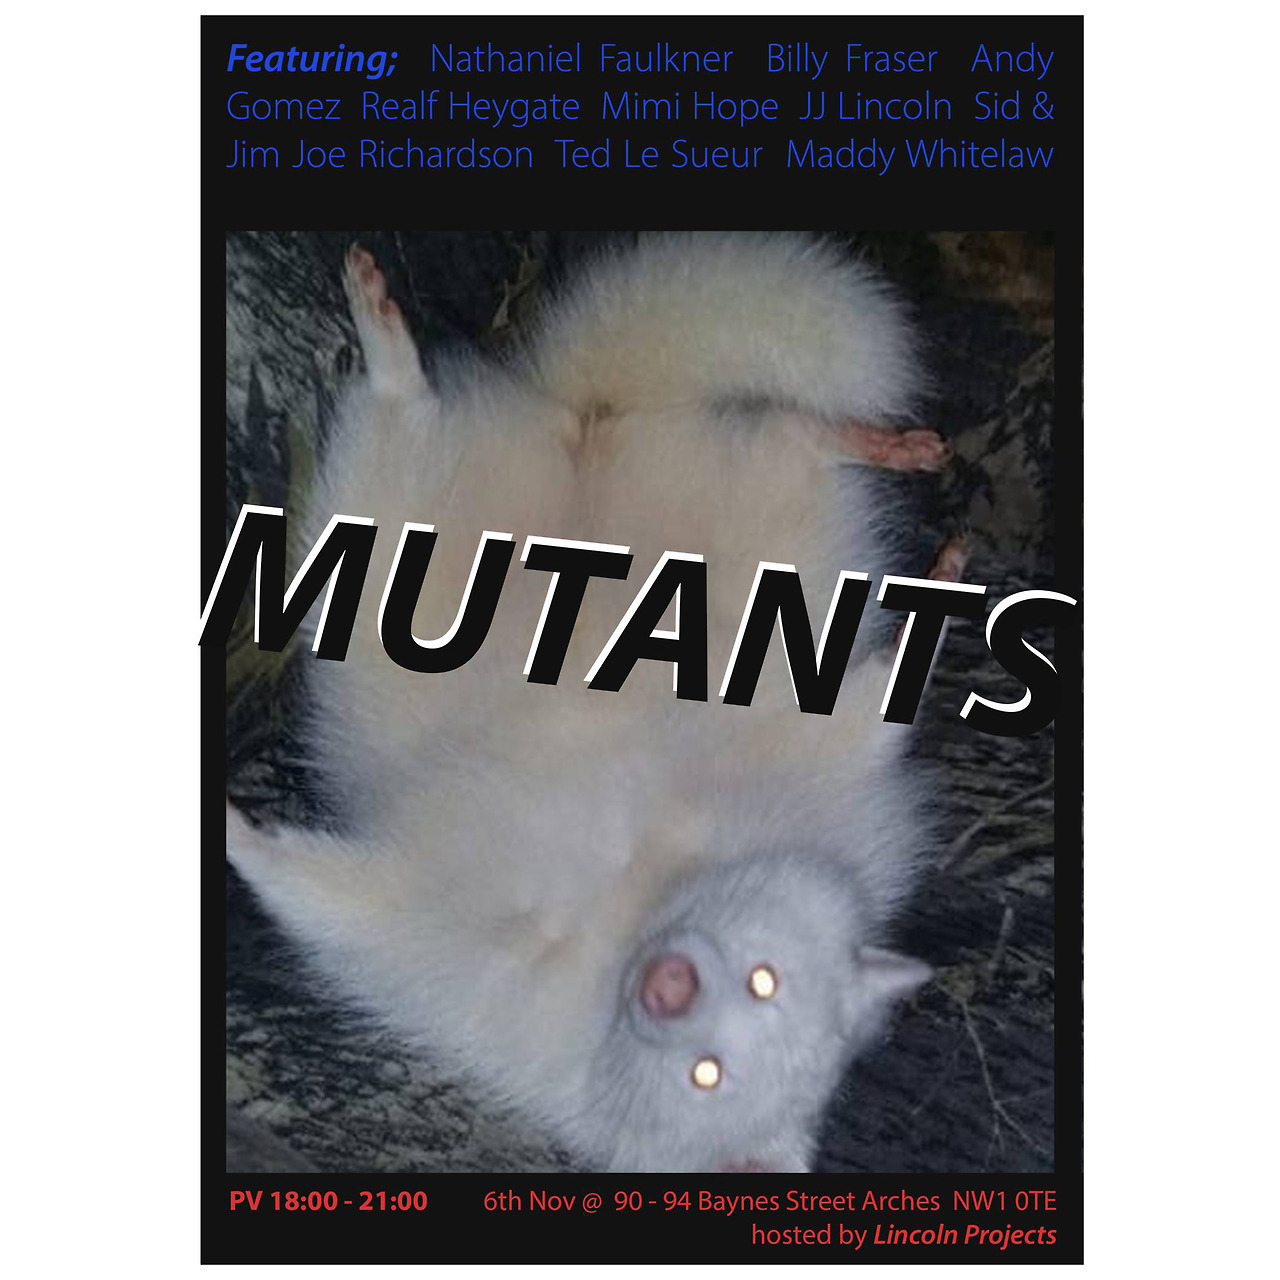 <hr /> <b>◎  [22.10.17]</b> 

MUTANTS! Opens on 6th of Nov — Really excited to be exhibiting in the abandoned railway arches on Baynes Street, Camden. Amazing space and great artists involved - come along! 
<br /> <br /> Burlington Camden presents the work of 11 artists. The first exhibition to take place in the abandoned railway arches; once a mechanics shop and now, only recently, a room with which to generate, discuss and display artworks. ‘Mutants’, being the inaugural exhibition in the space, will focus on metamorphosis; the transformation that Baynes Street is undergoing is not unlike the mutations that occur within ones own practice. The work on display explores the evolution that those artists face; whether they are grotesque, seductive, prophetic or anticlimactic, they are the product of a process of self-examination and more than mere curiosities. 

<br /> <br /> Private View: 6th November (18:00 - 21:00) 
Open: 7th November (12:00 - 21:00)